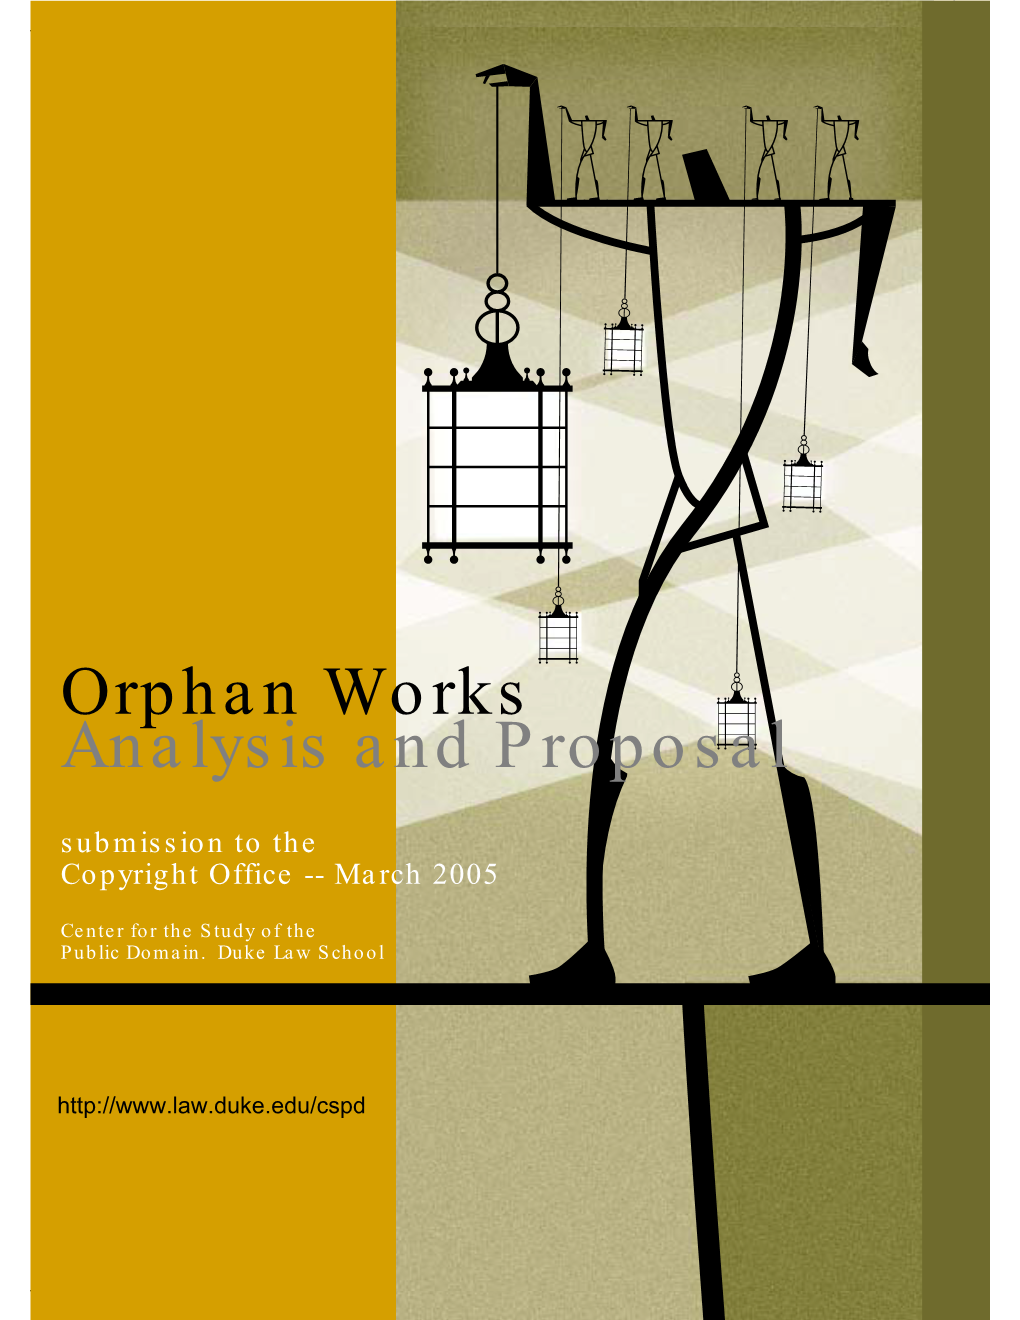 Orphan Works Analysis and Proposal